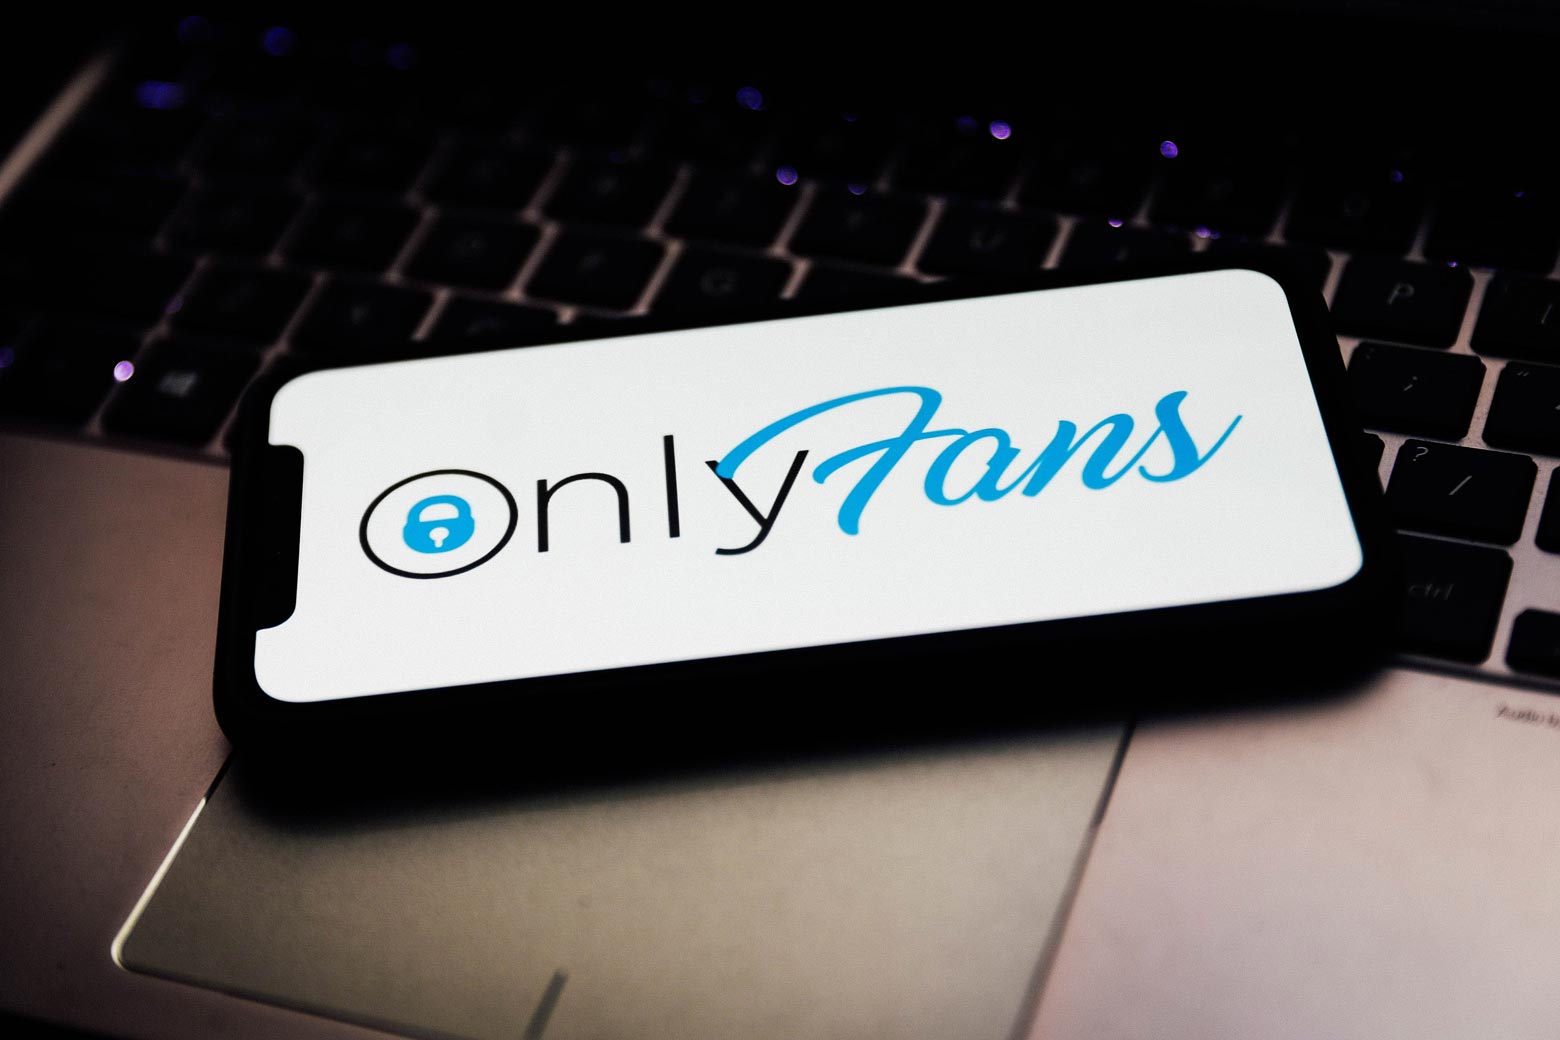 OnlyFans logo is seen displayed on a phone screen.